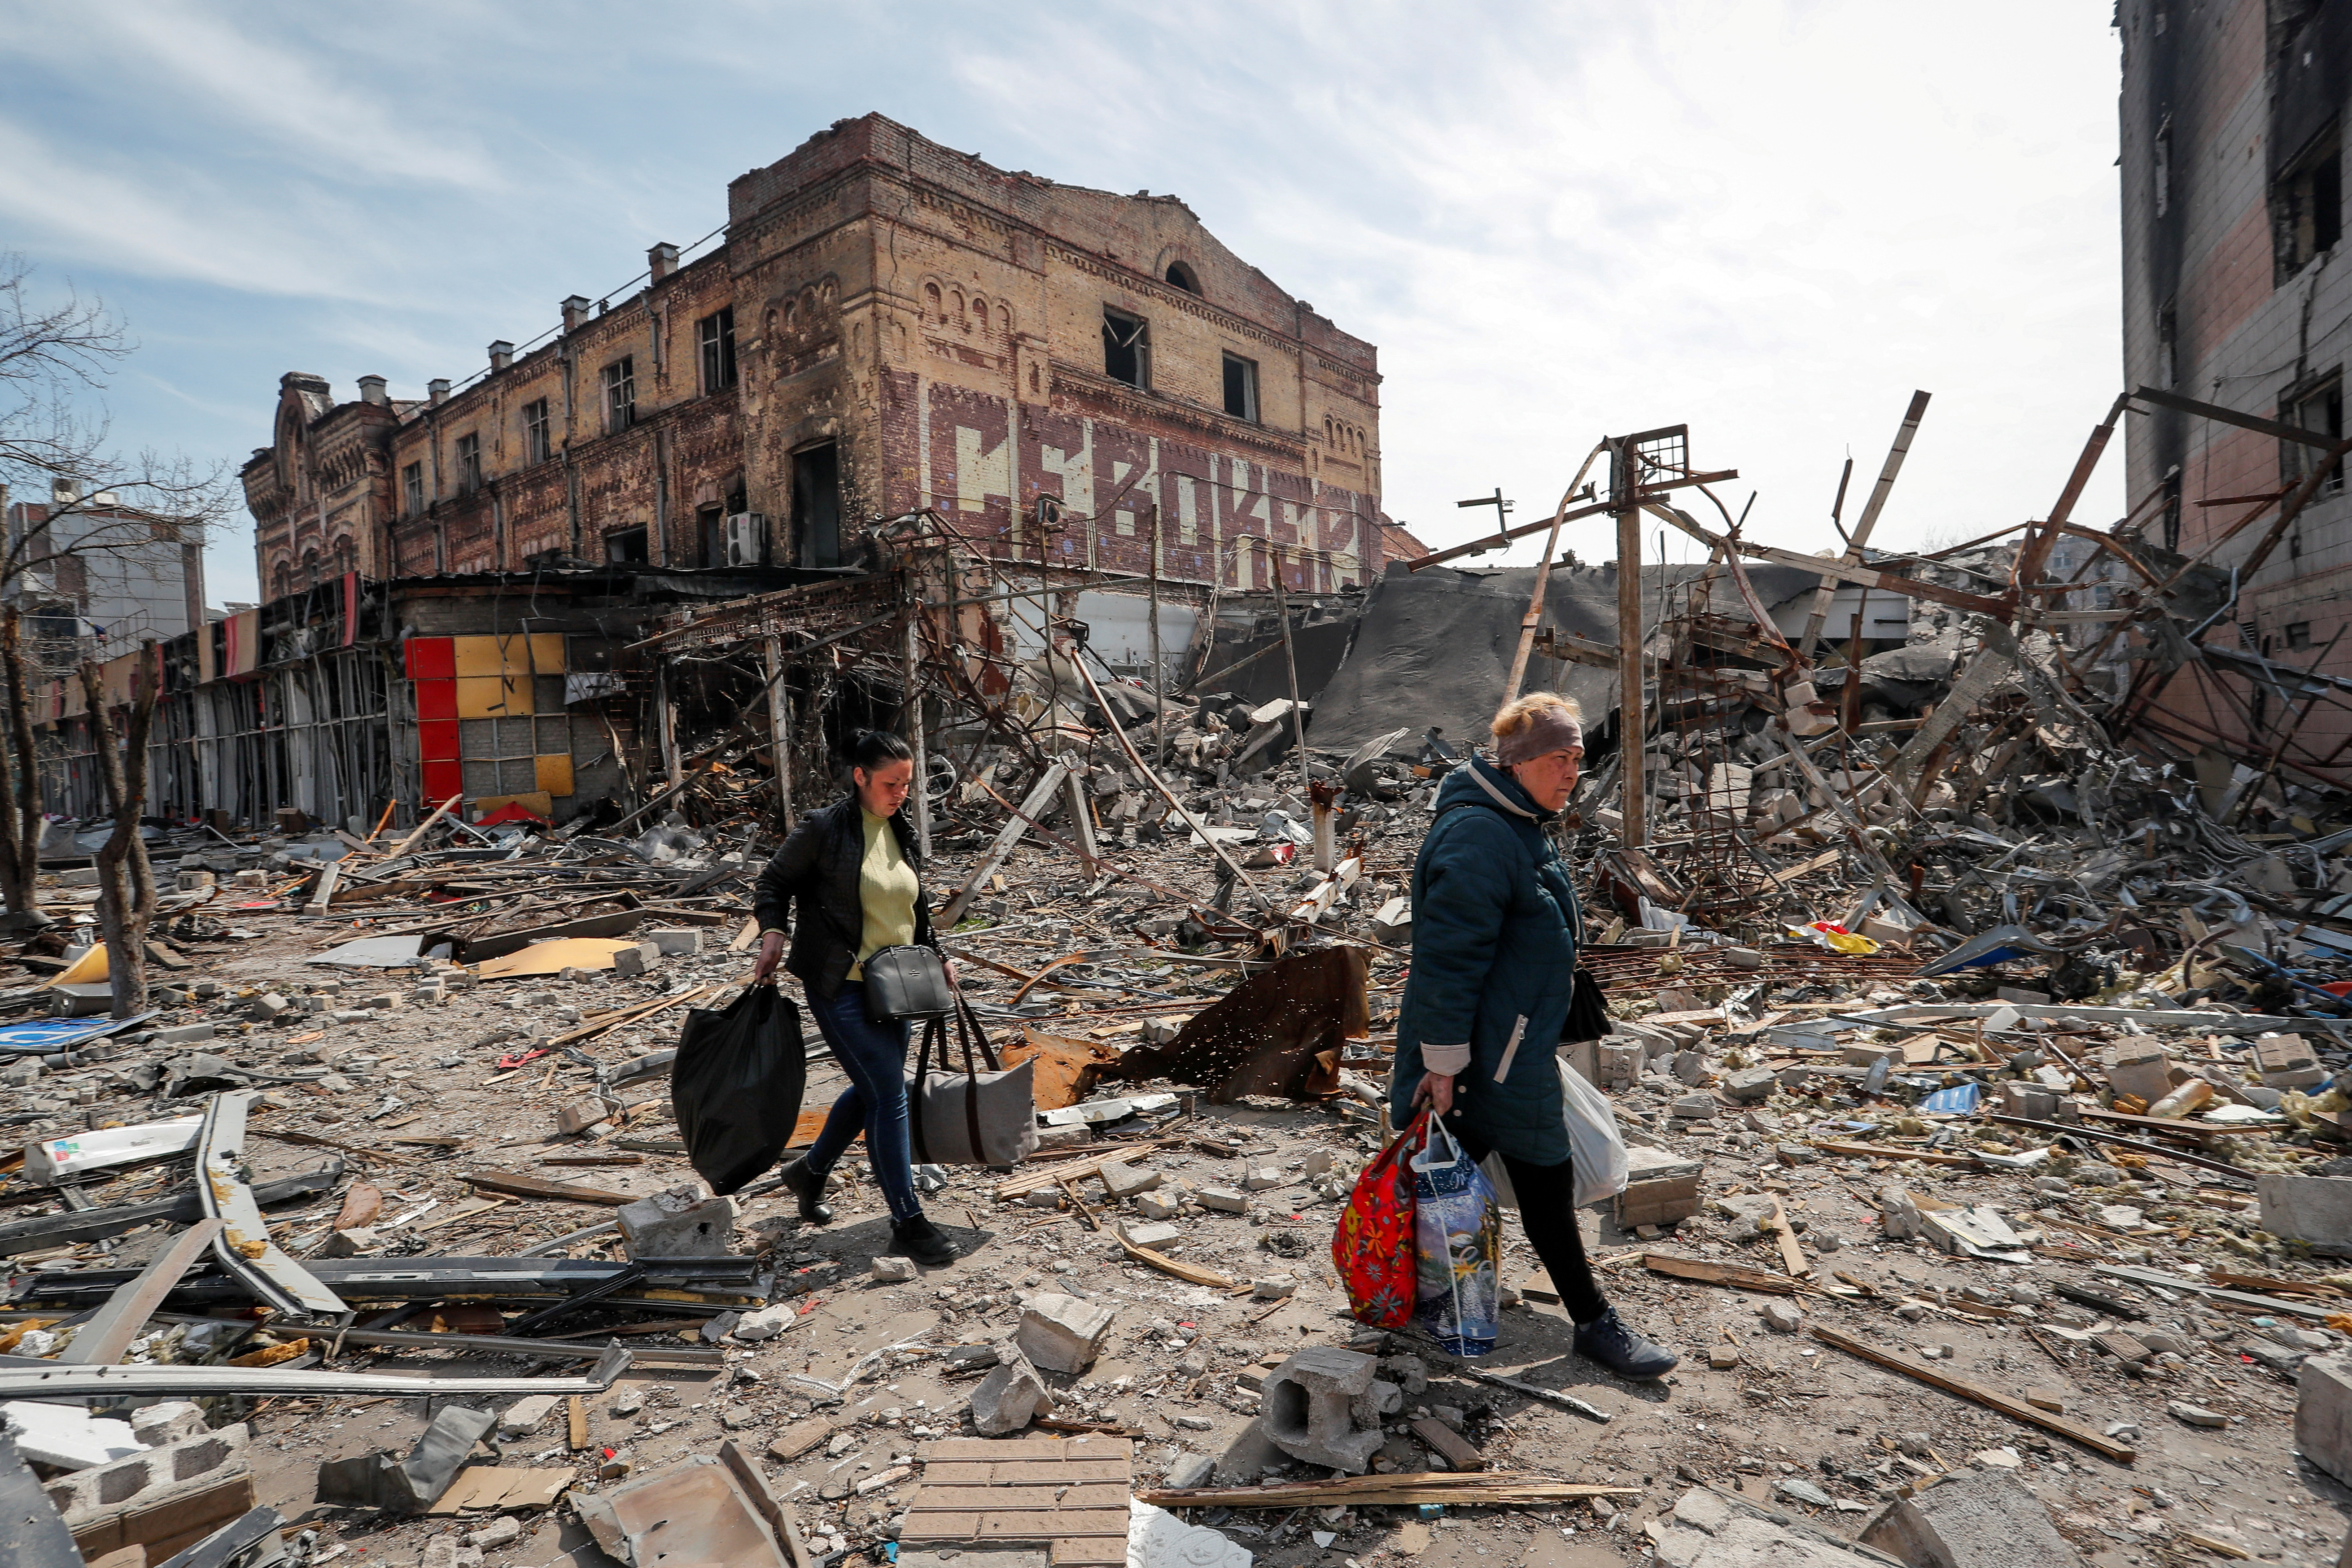 Residents carry their belongings near buildings destroyed in the course of the Ukraine-Russia conflict, in Mariupol